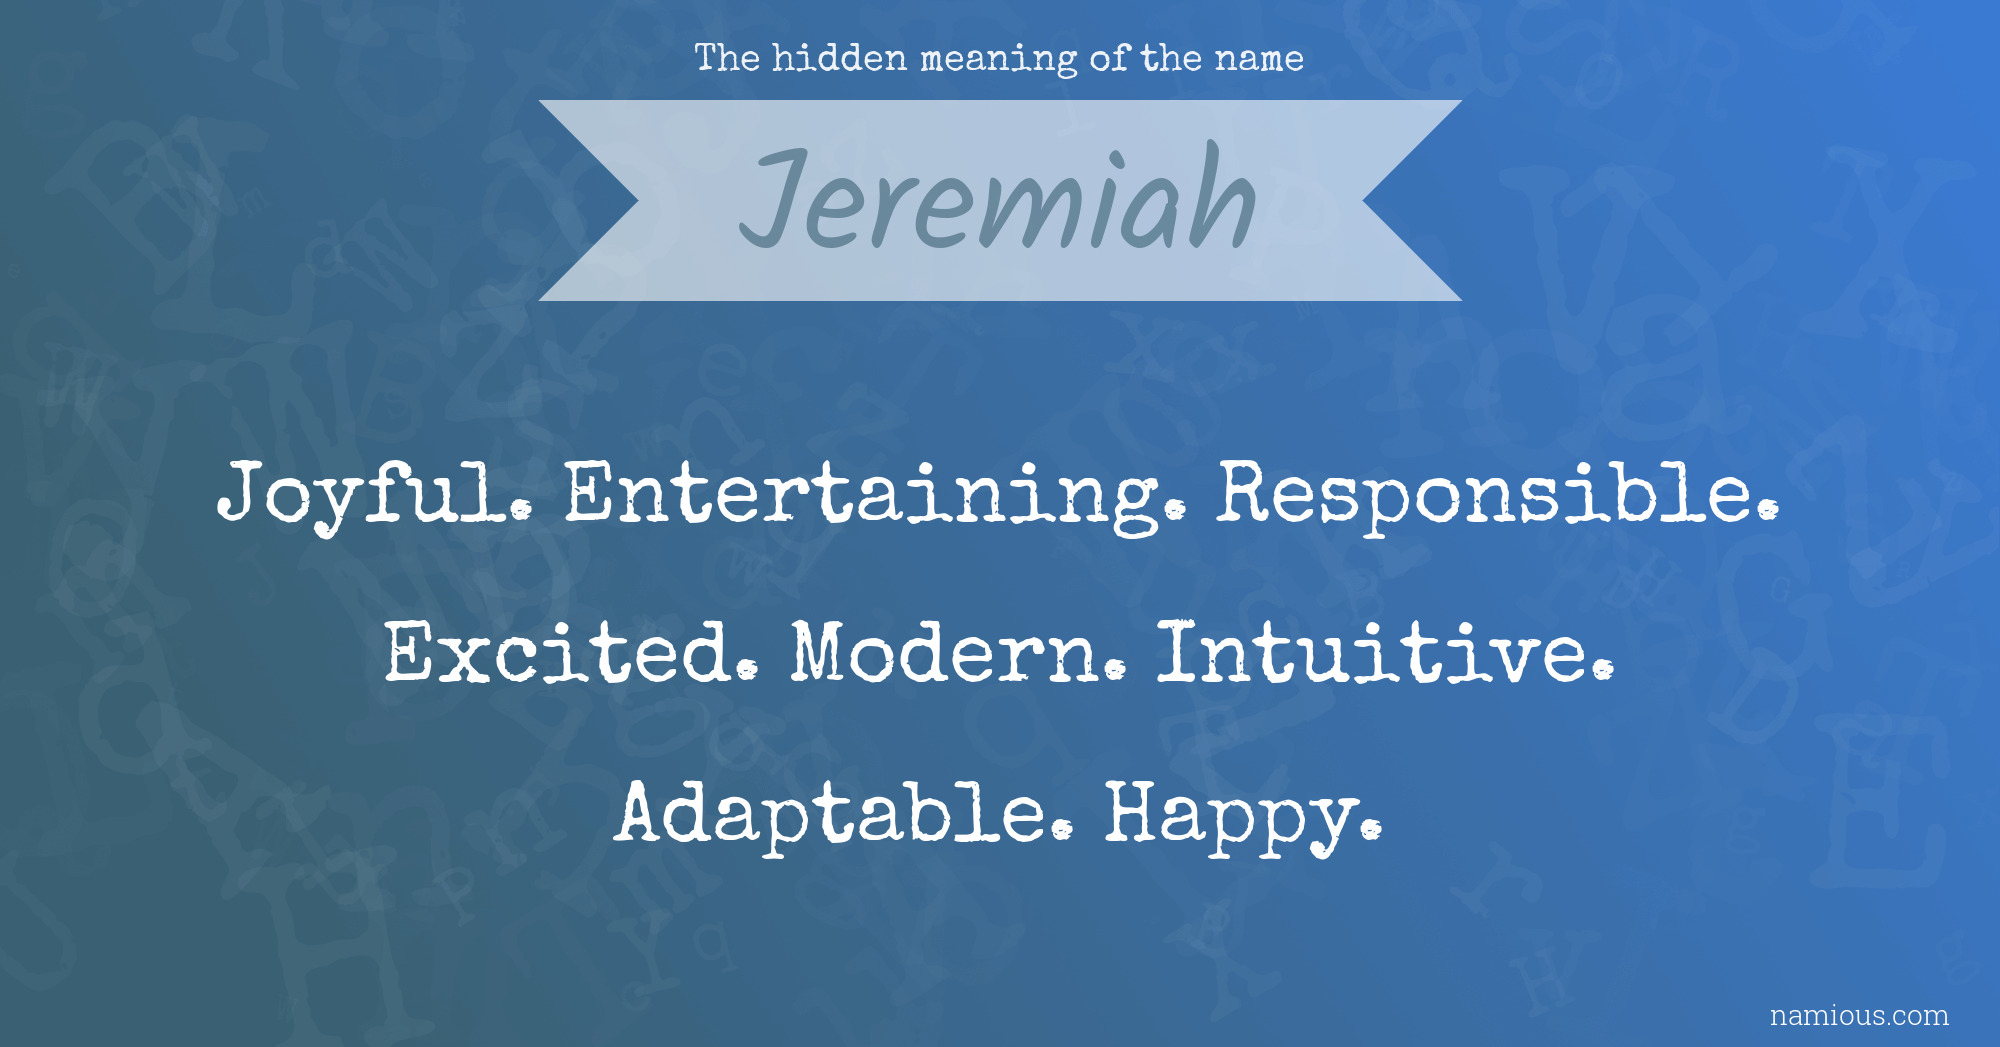 The hidden meaning of the name Jeremiah